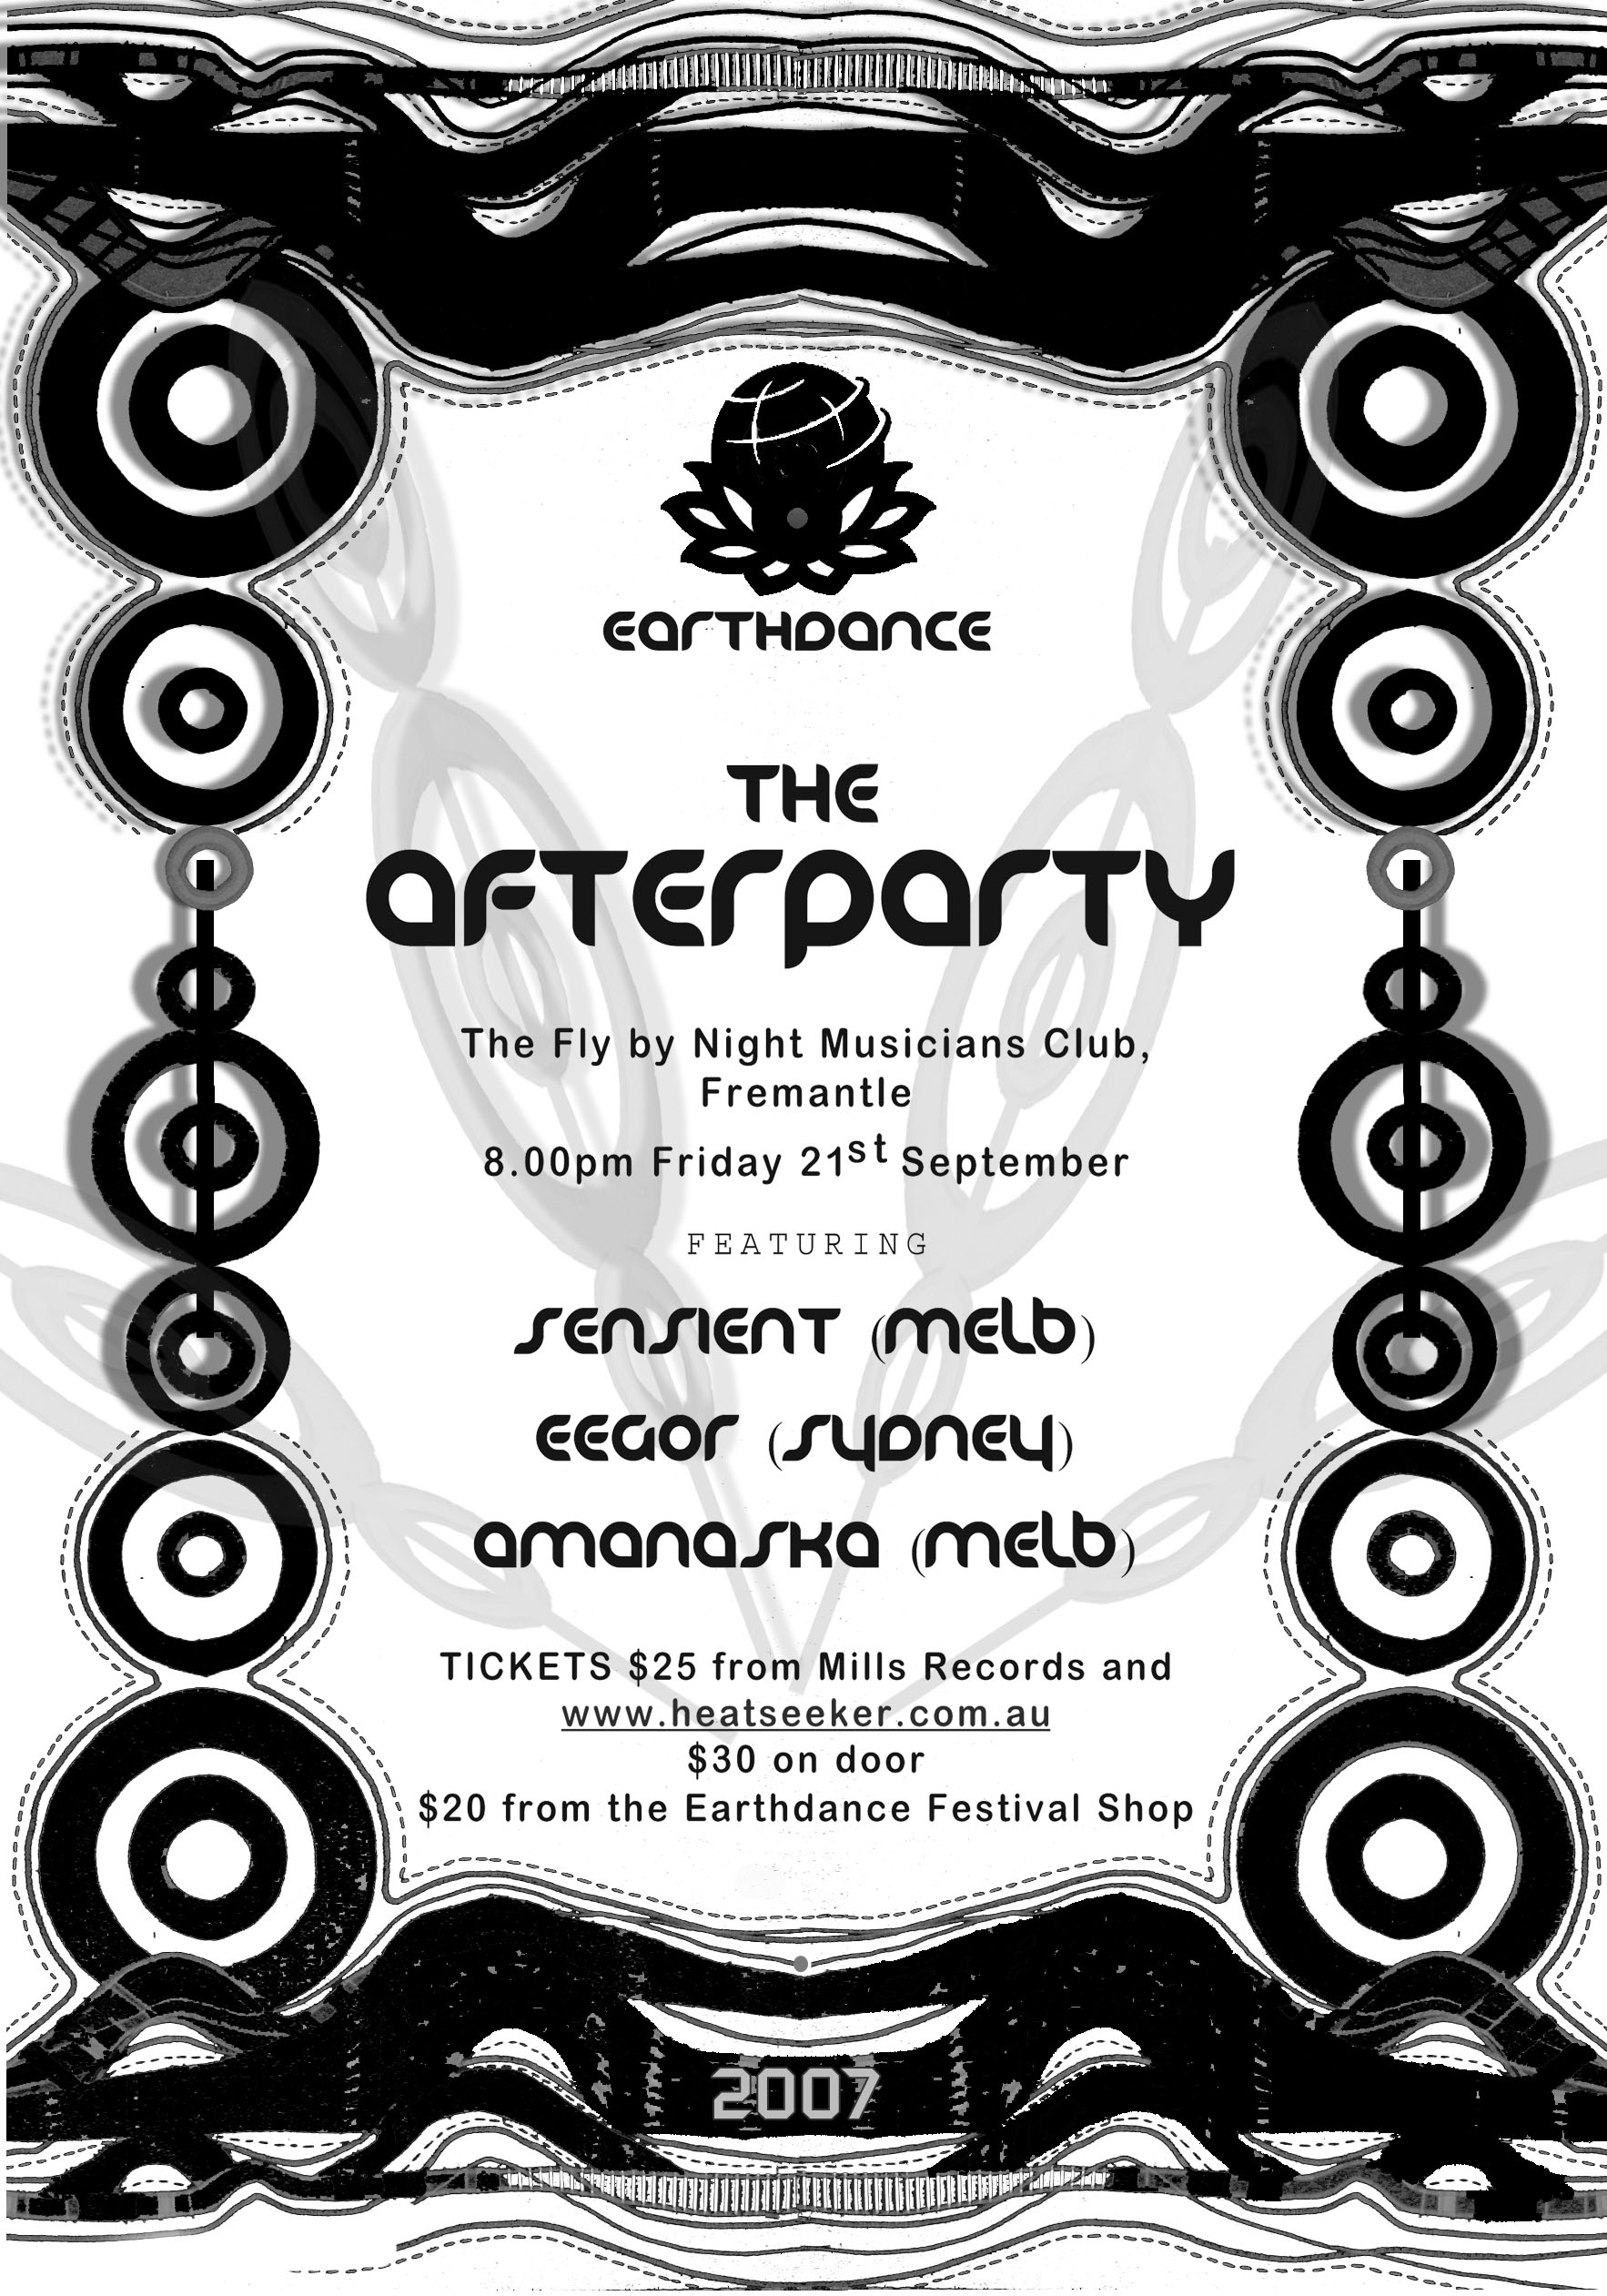 EARTHDANCE THE AFTERPARTY